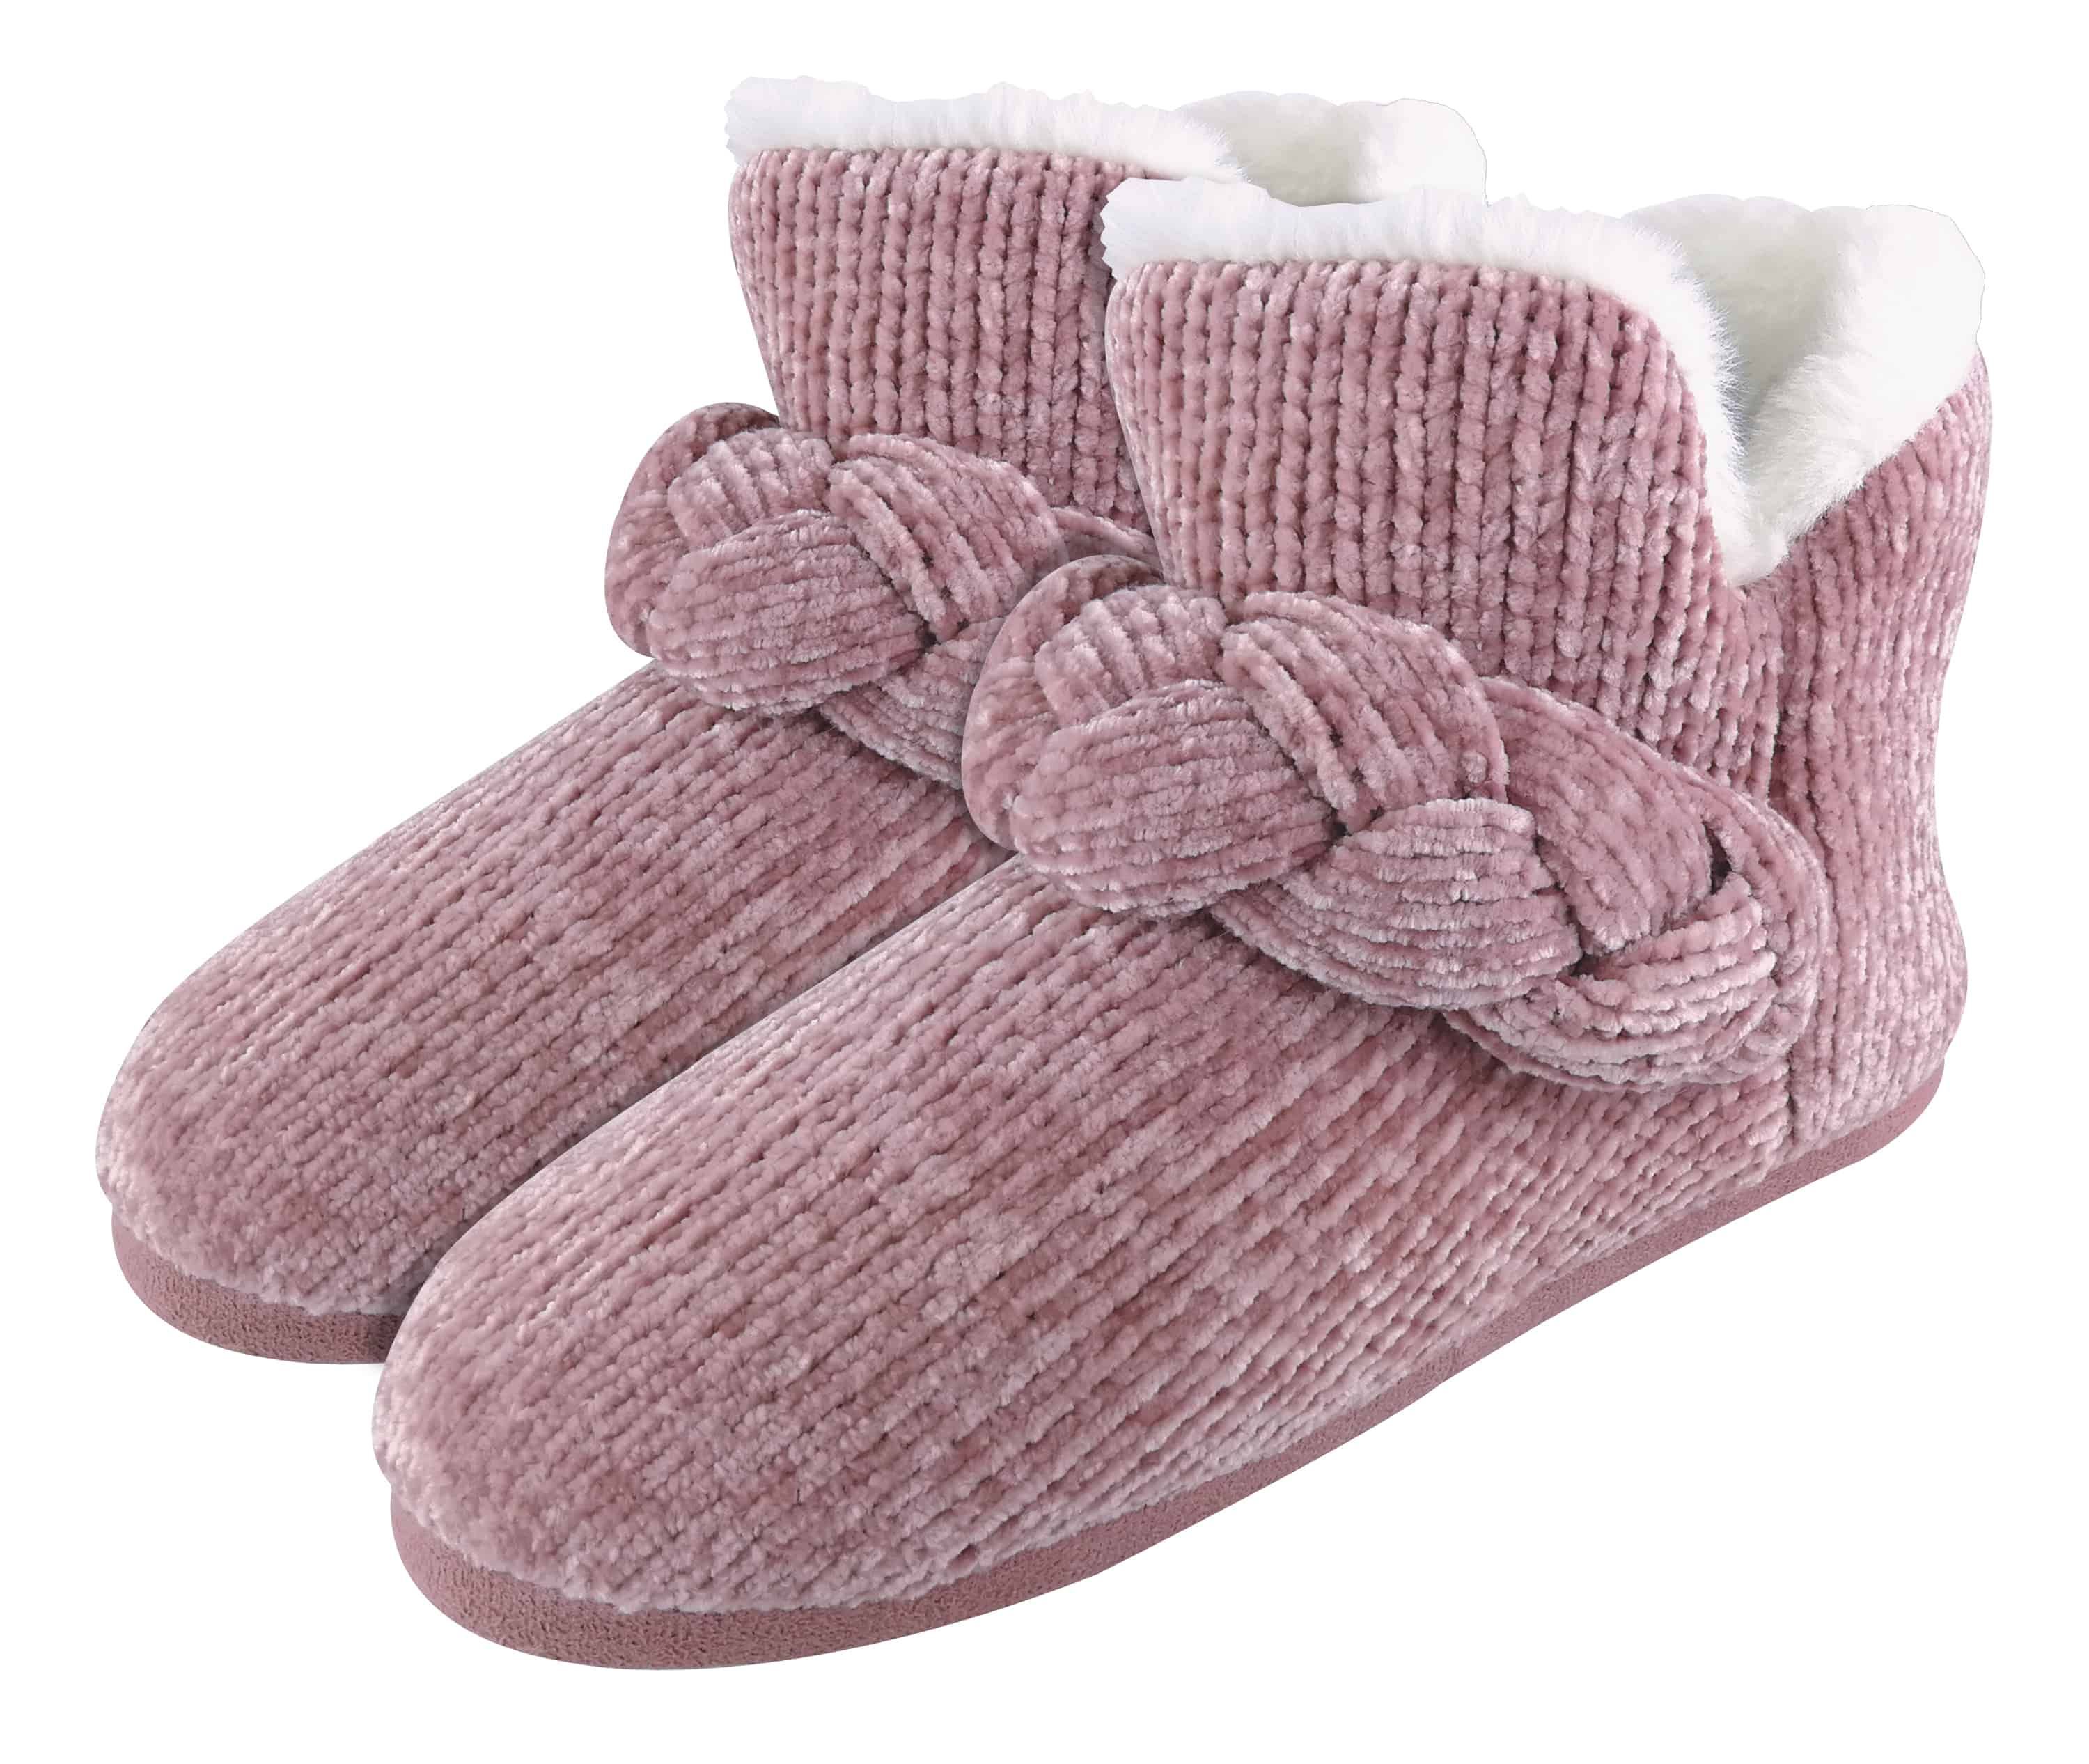 Ladies Knitted Warm Fleece Plush Slippers/Slipper Boots/Booties in Grey Fairisle and Pink Cord Styles Dunlop